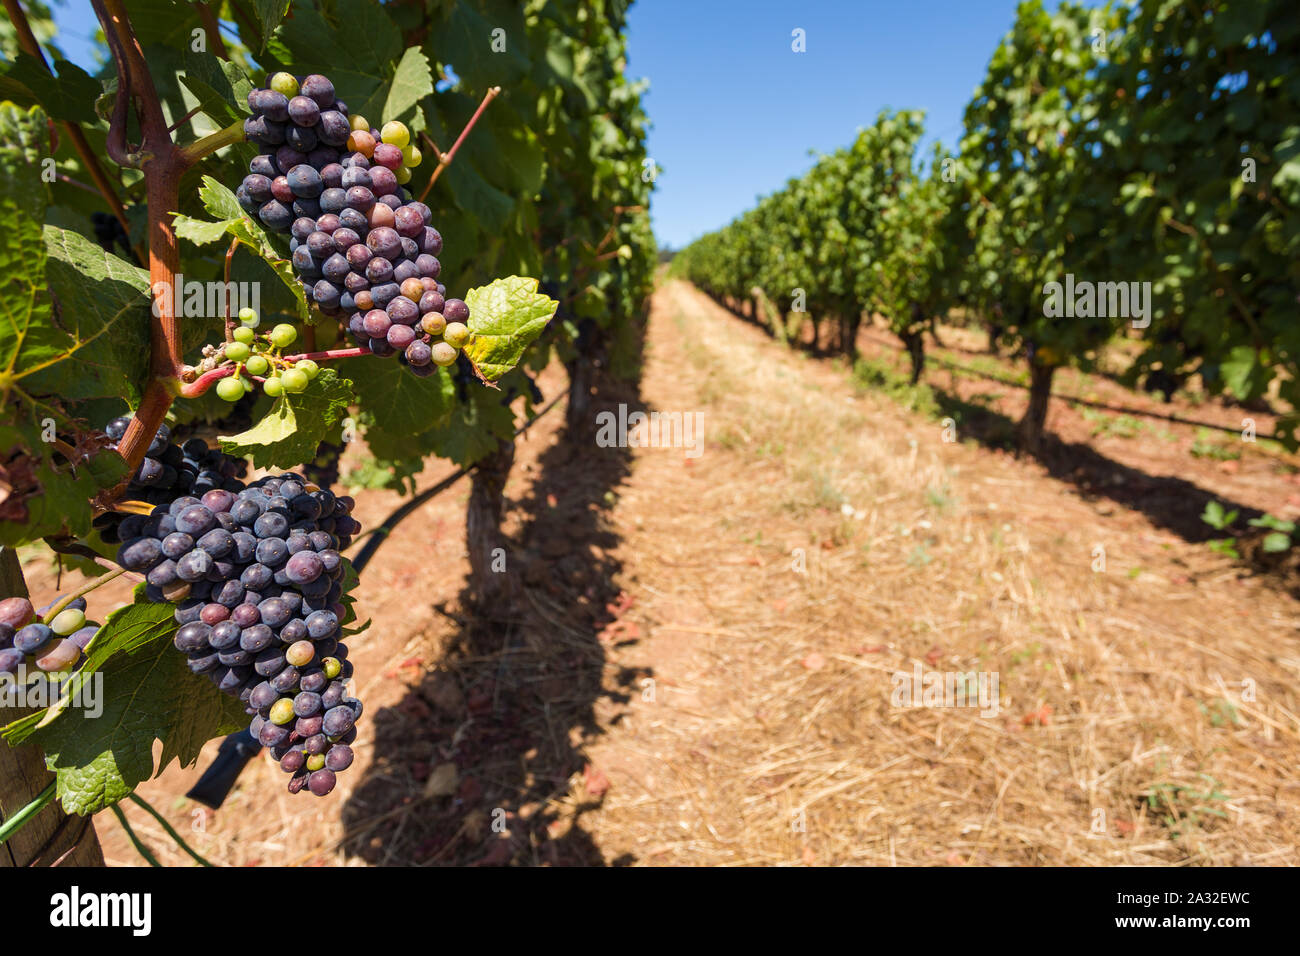 Red wine grapes growing on rows of vines at a Willamette Valley winery. Stock Photo